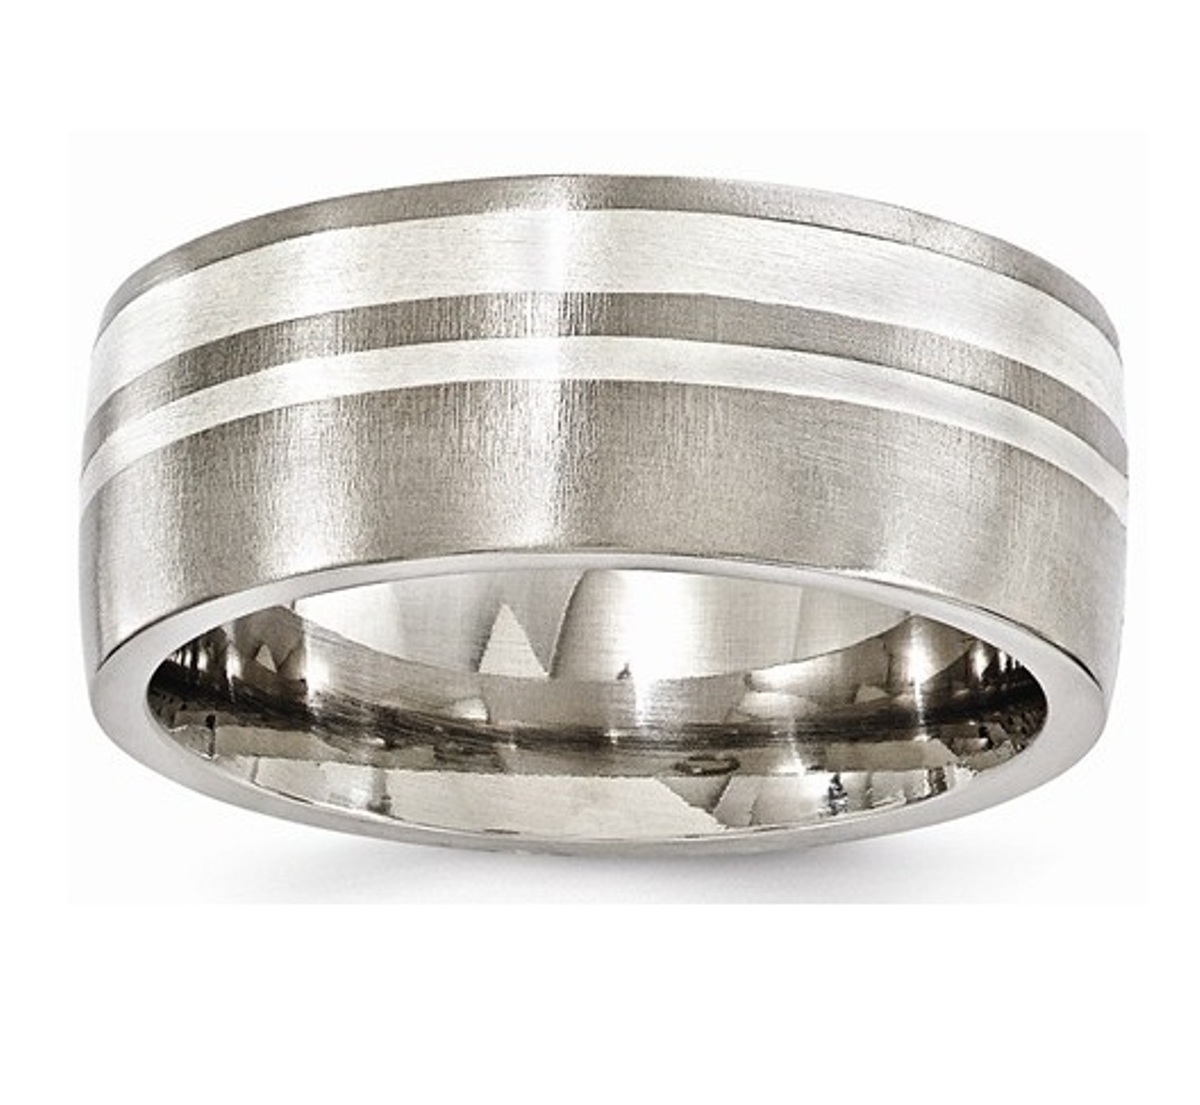  Titanium And Sterling Silver Brushed 9mm Band